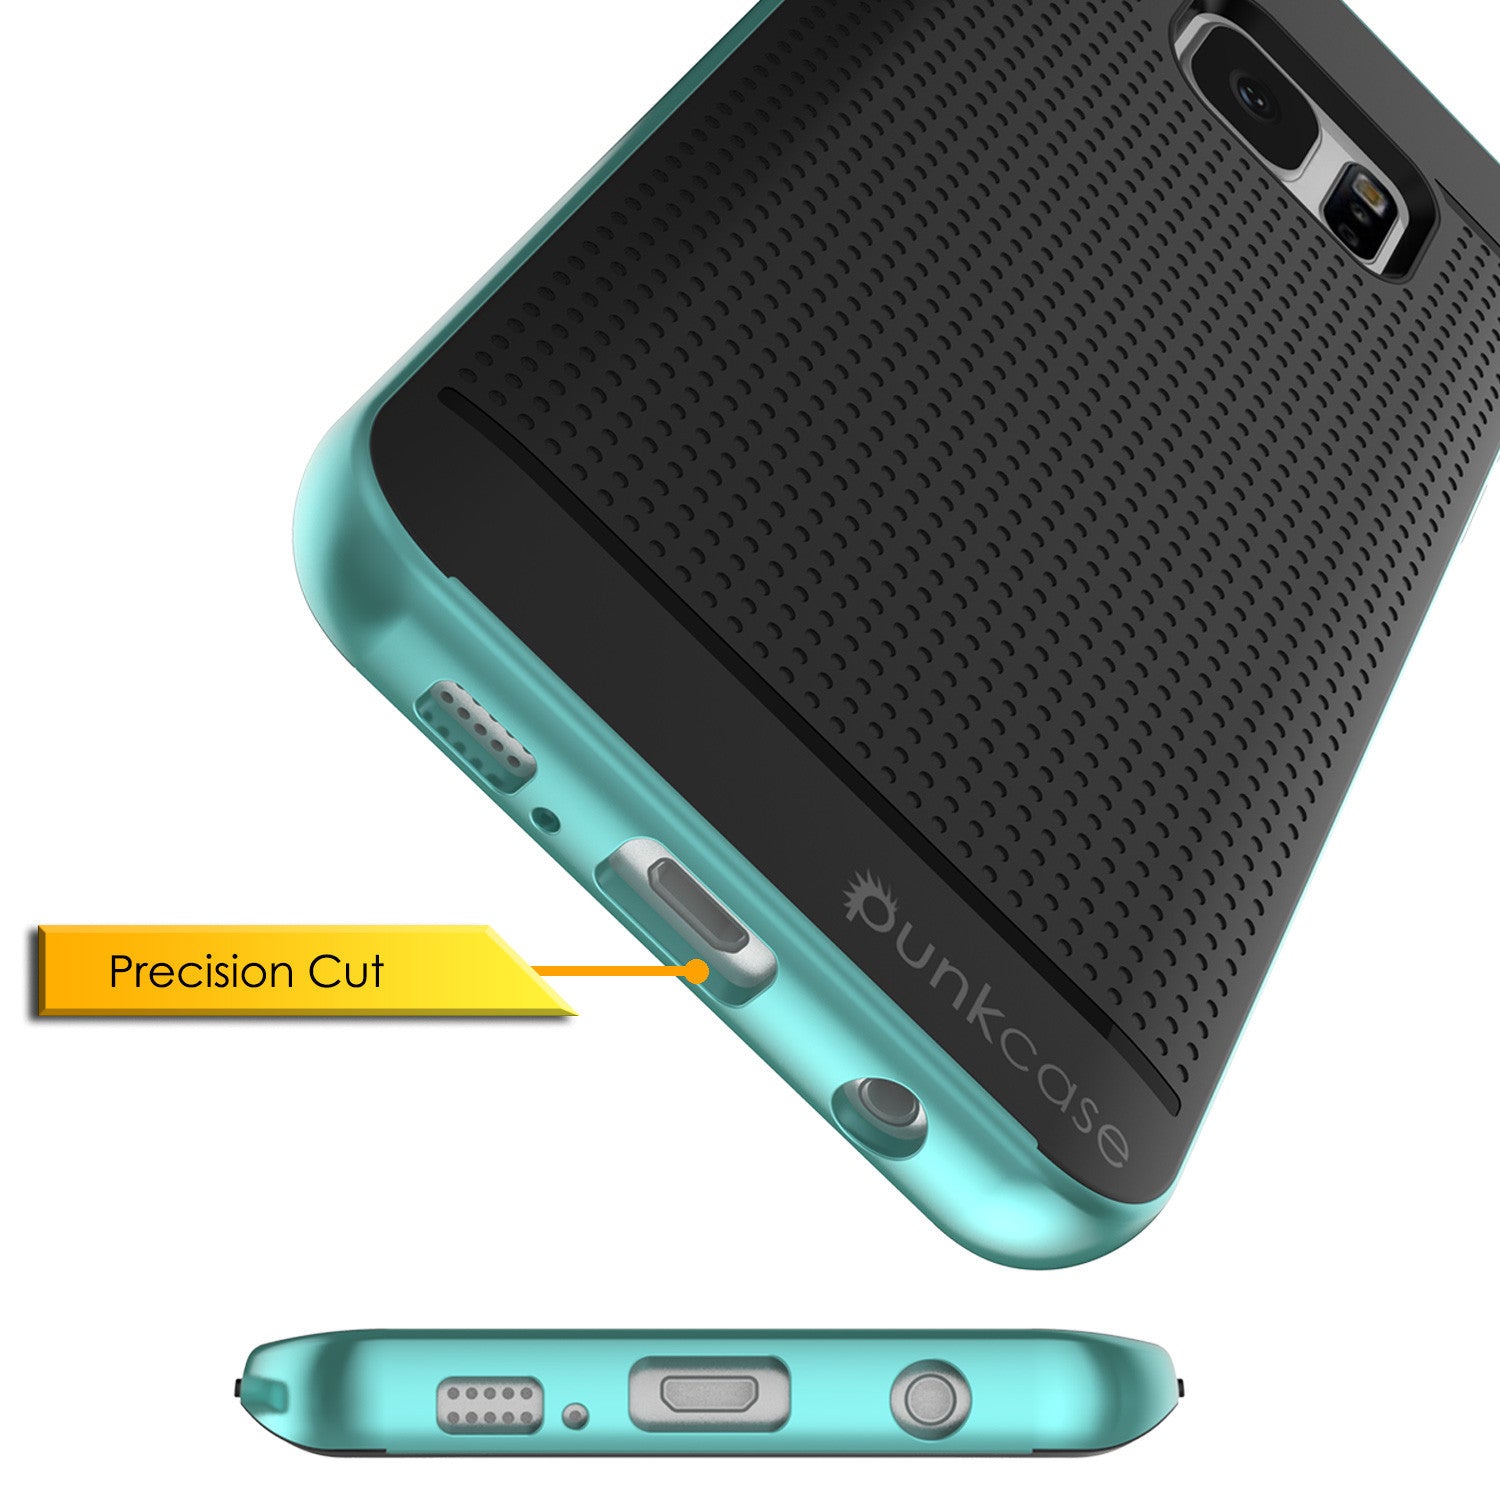 Galaxy S7 Edge Case, Punkcase Stealth Teal Series Hybrid 3-Piece Shockproof Dual Layer Cover